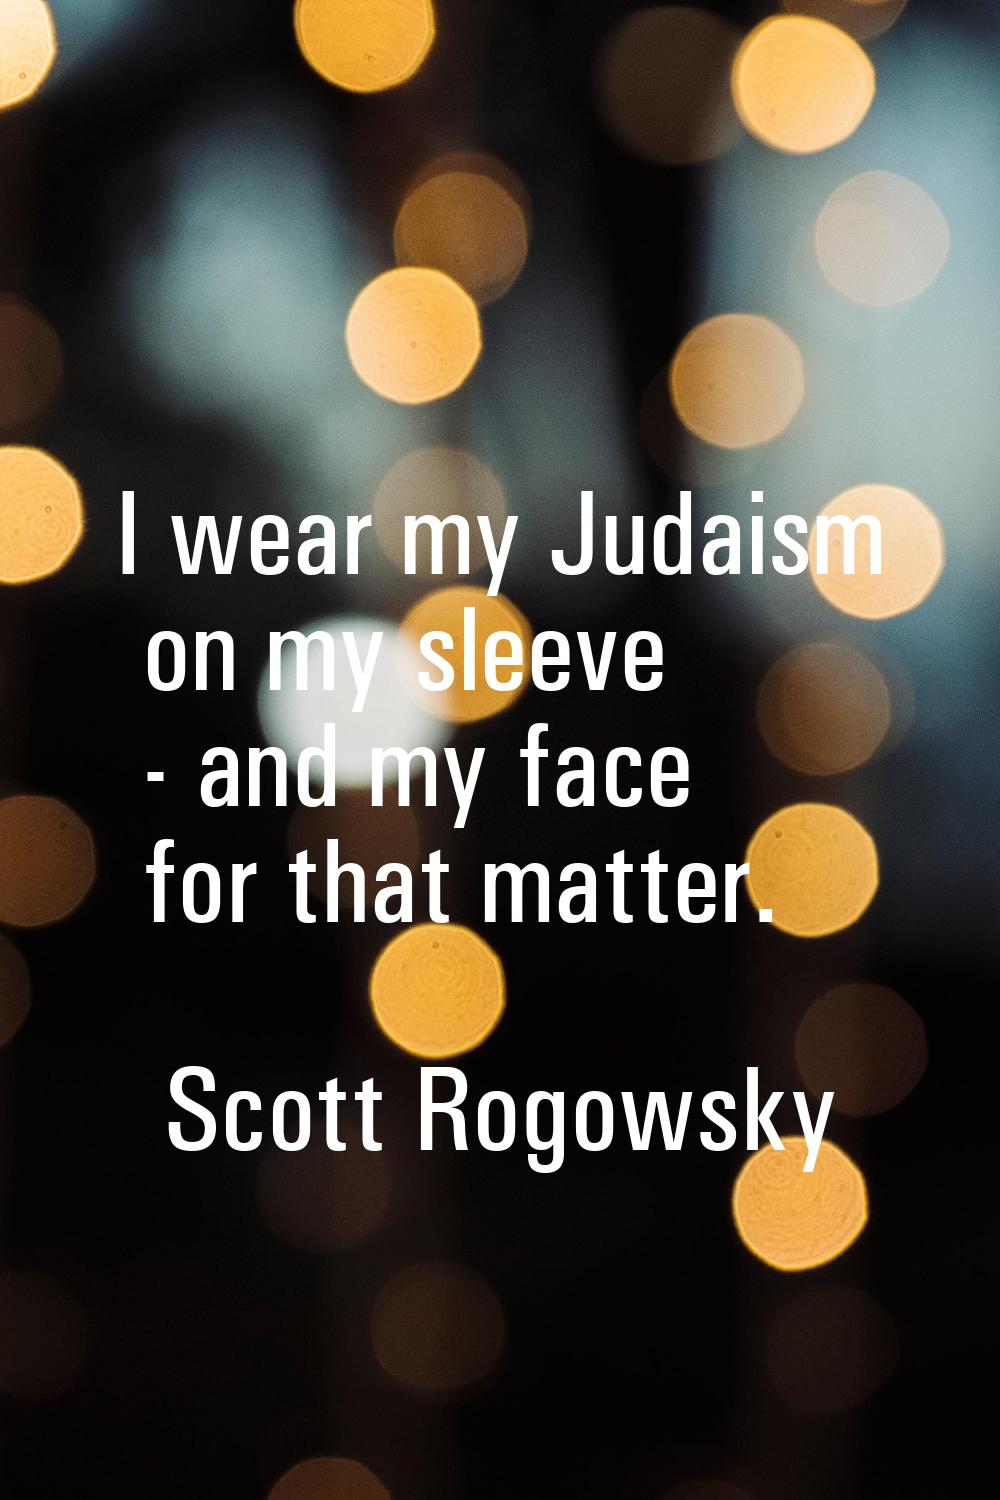 I wear my Judaism on my sleeve - and my face for that matter.